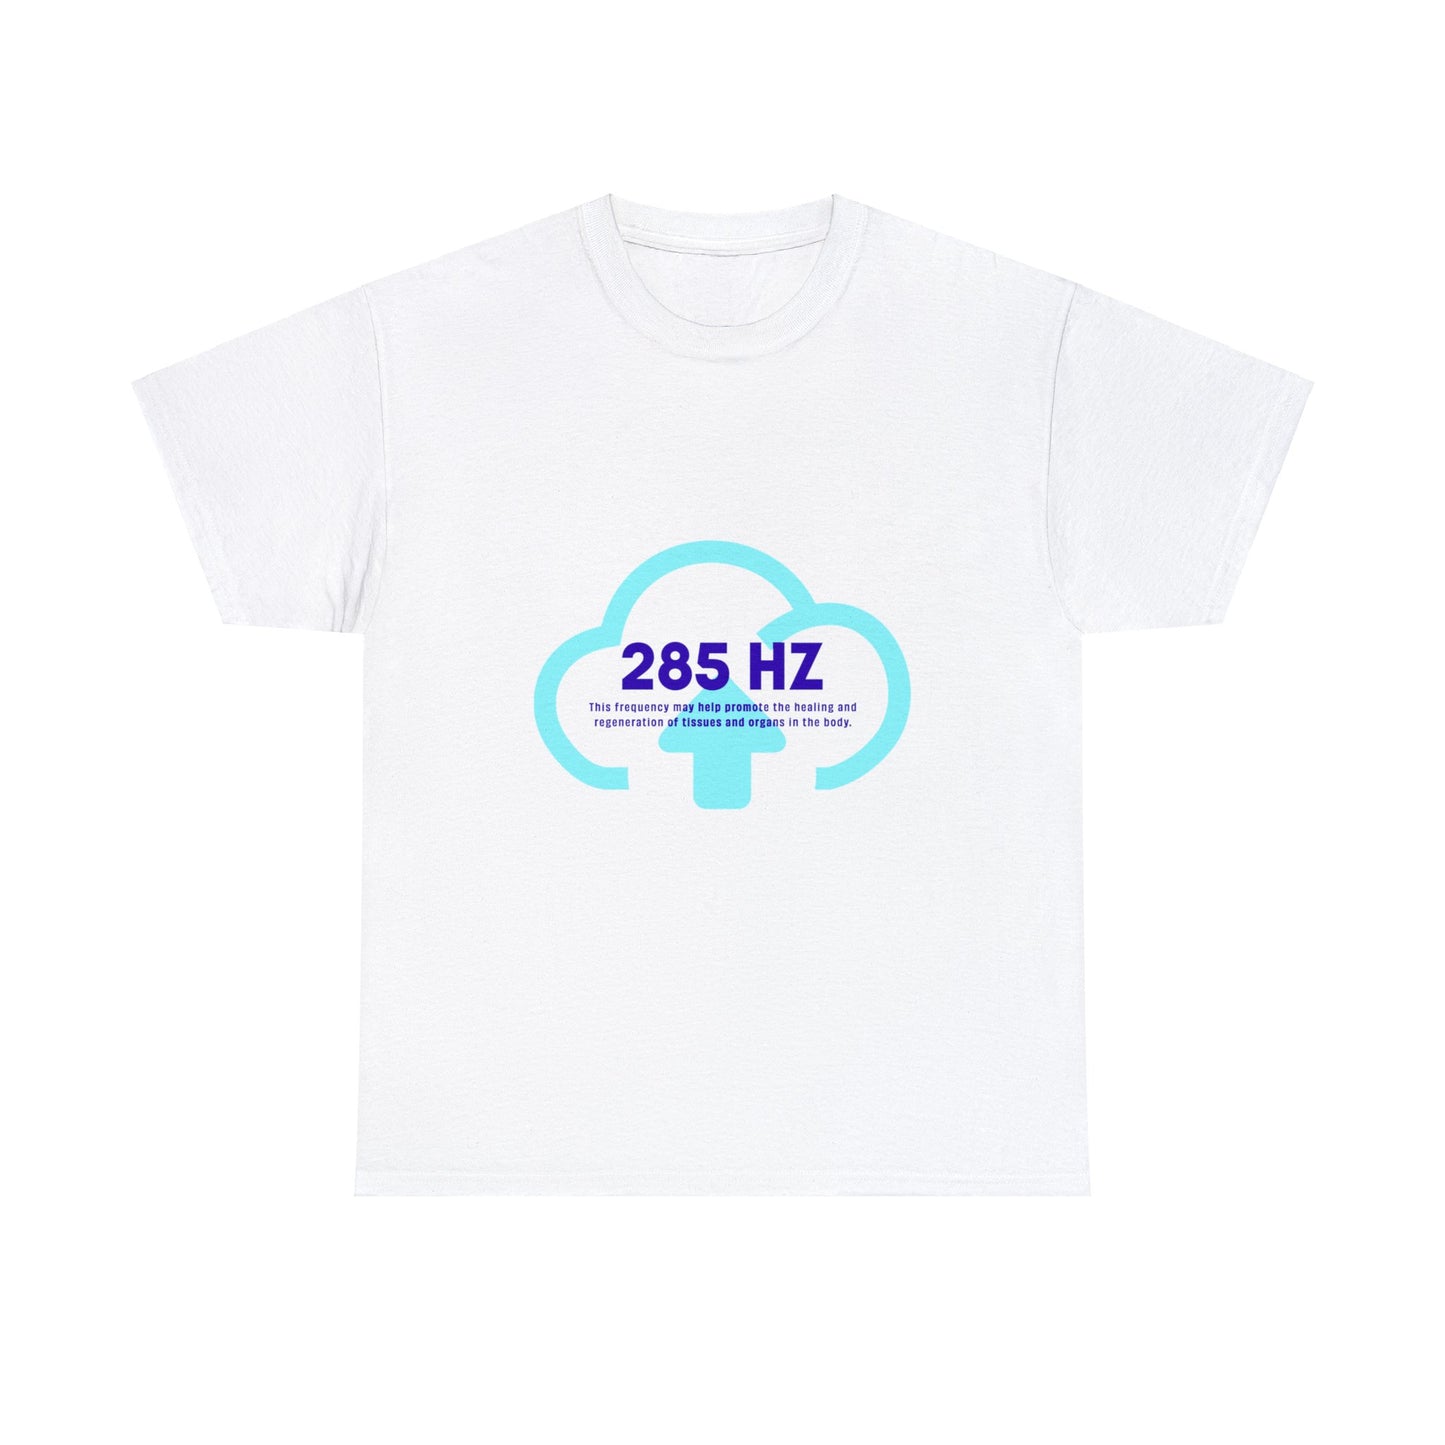 285 Hz Frequency T-Shirt